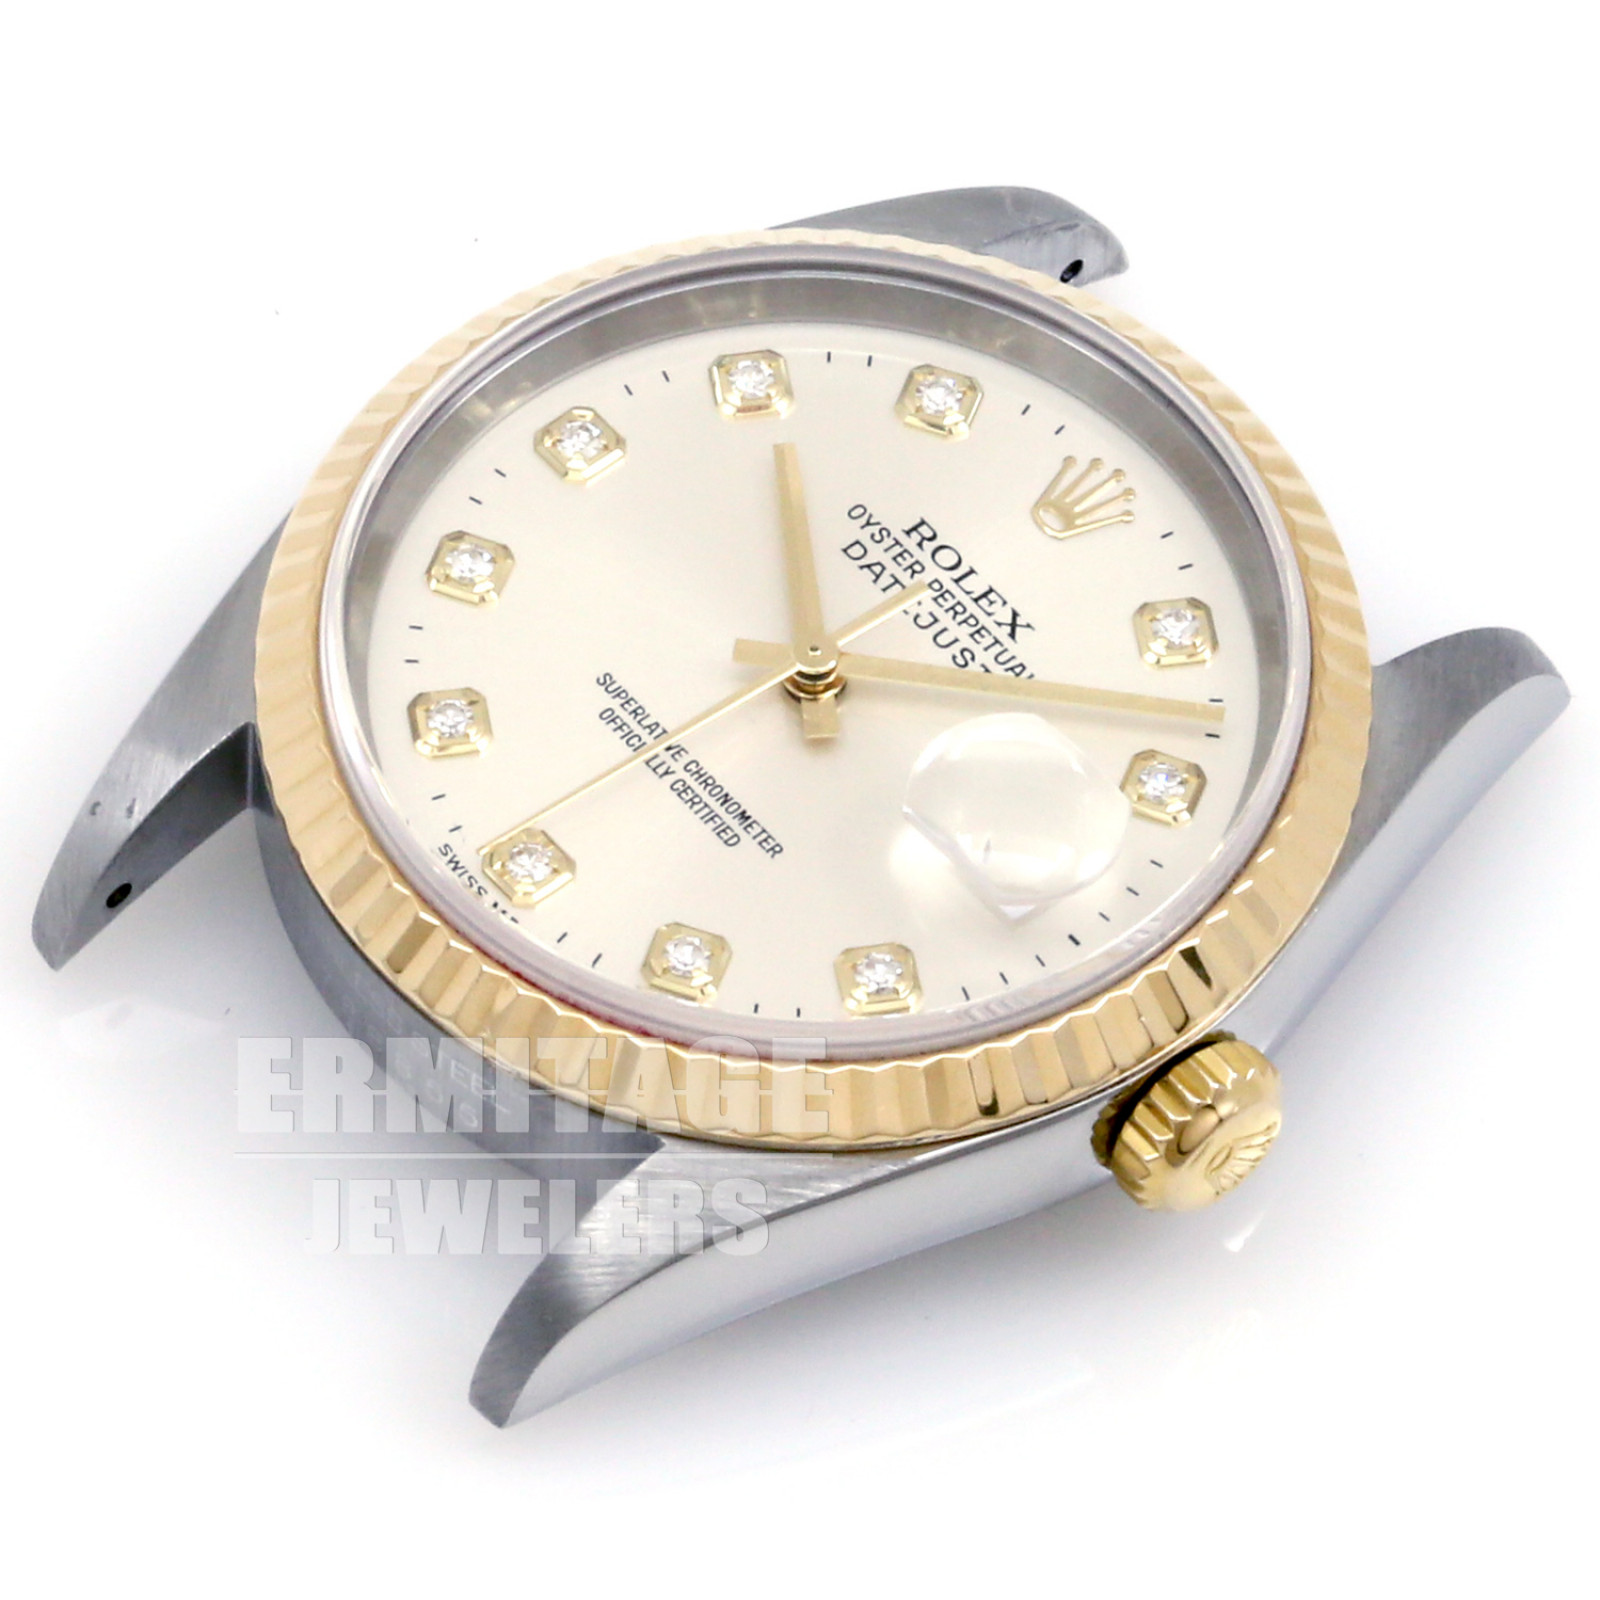 Diamond Rolex Datejust 16233 with Steel Dial